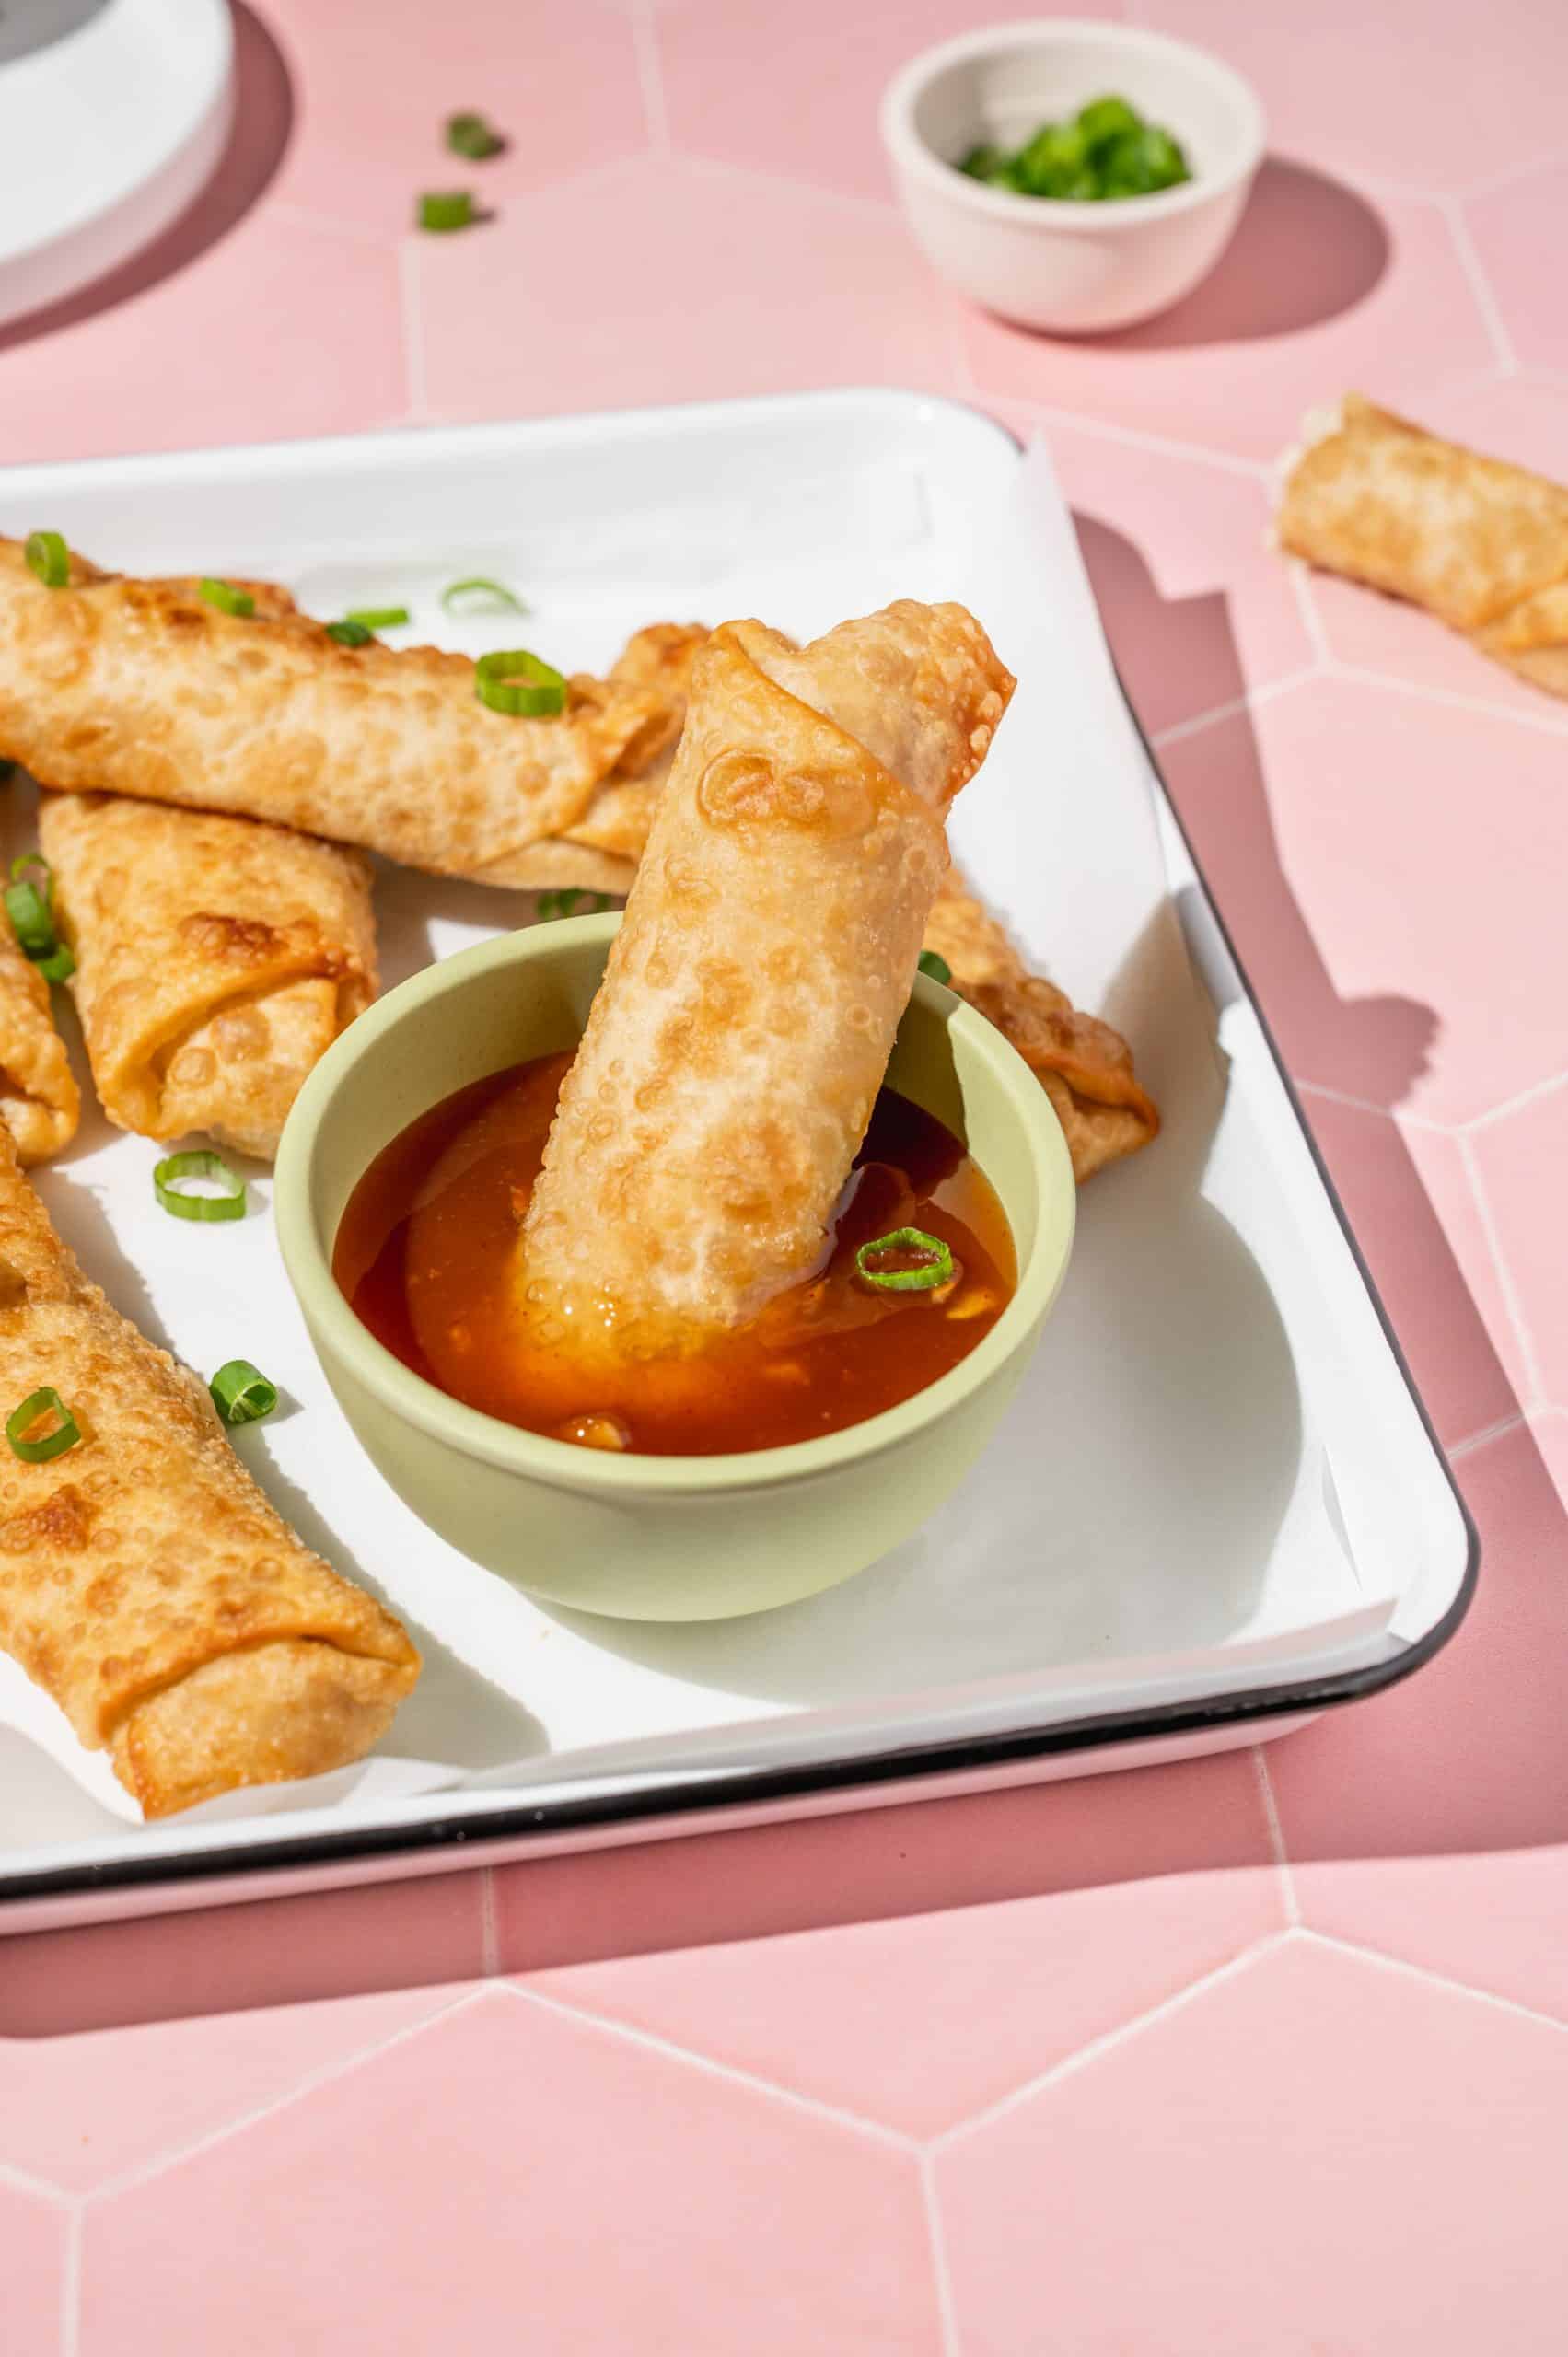 crab rangoon egg roll being dipped in sweet chili sauce, more egg rolls on the tray in the background